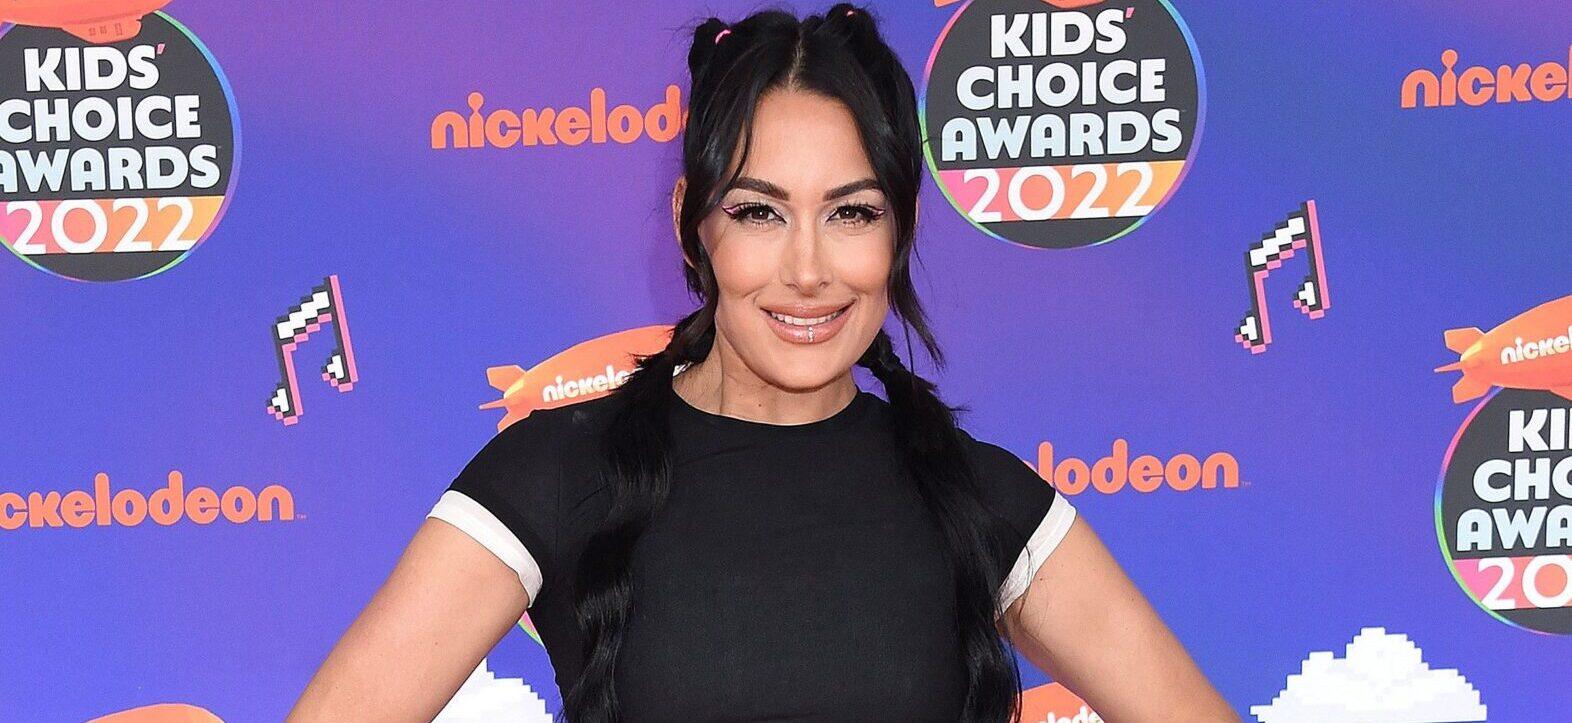 Brie Bella at the Nickelodeon Kids' Choice Awards 2022 - Arrivals